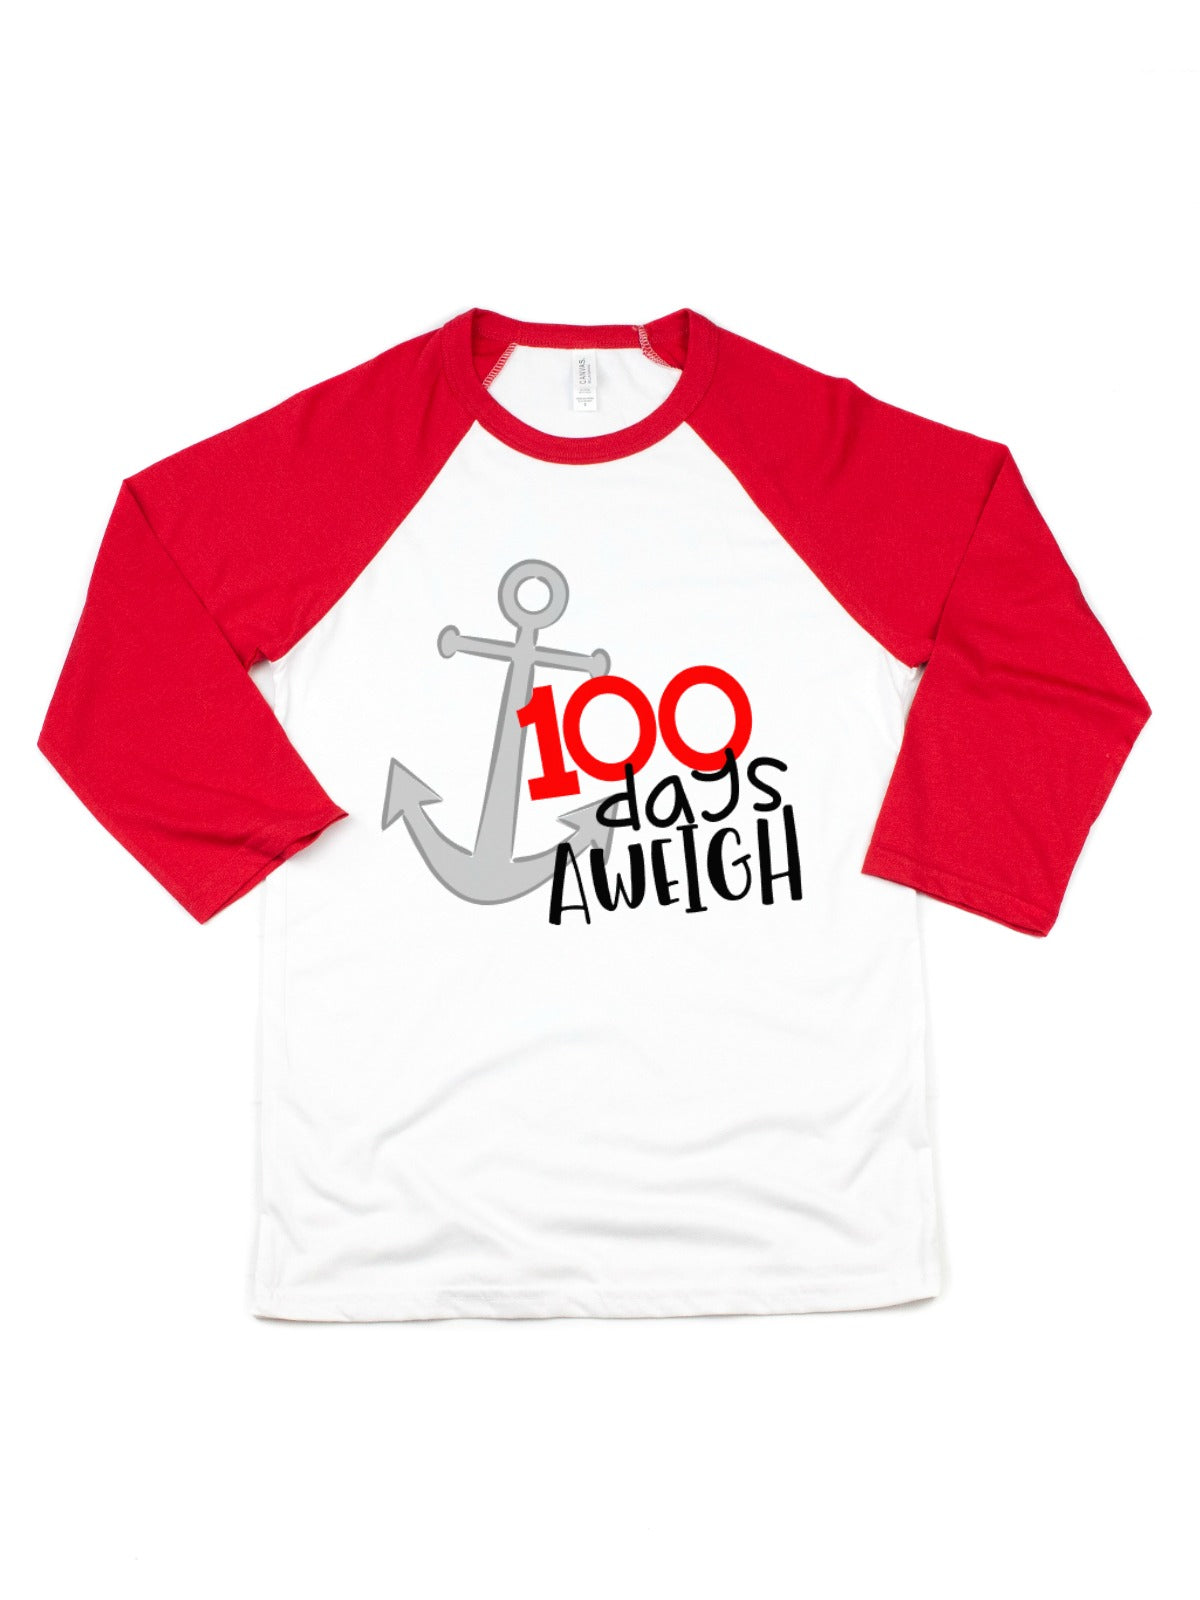 100 days aweigh kids 100th day of school shirt